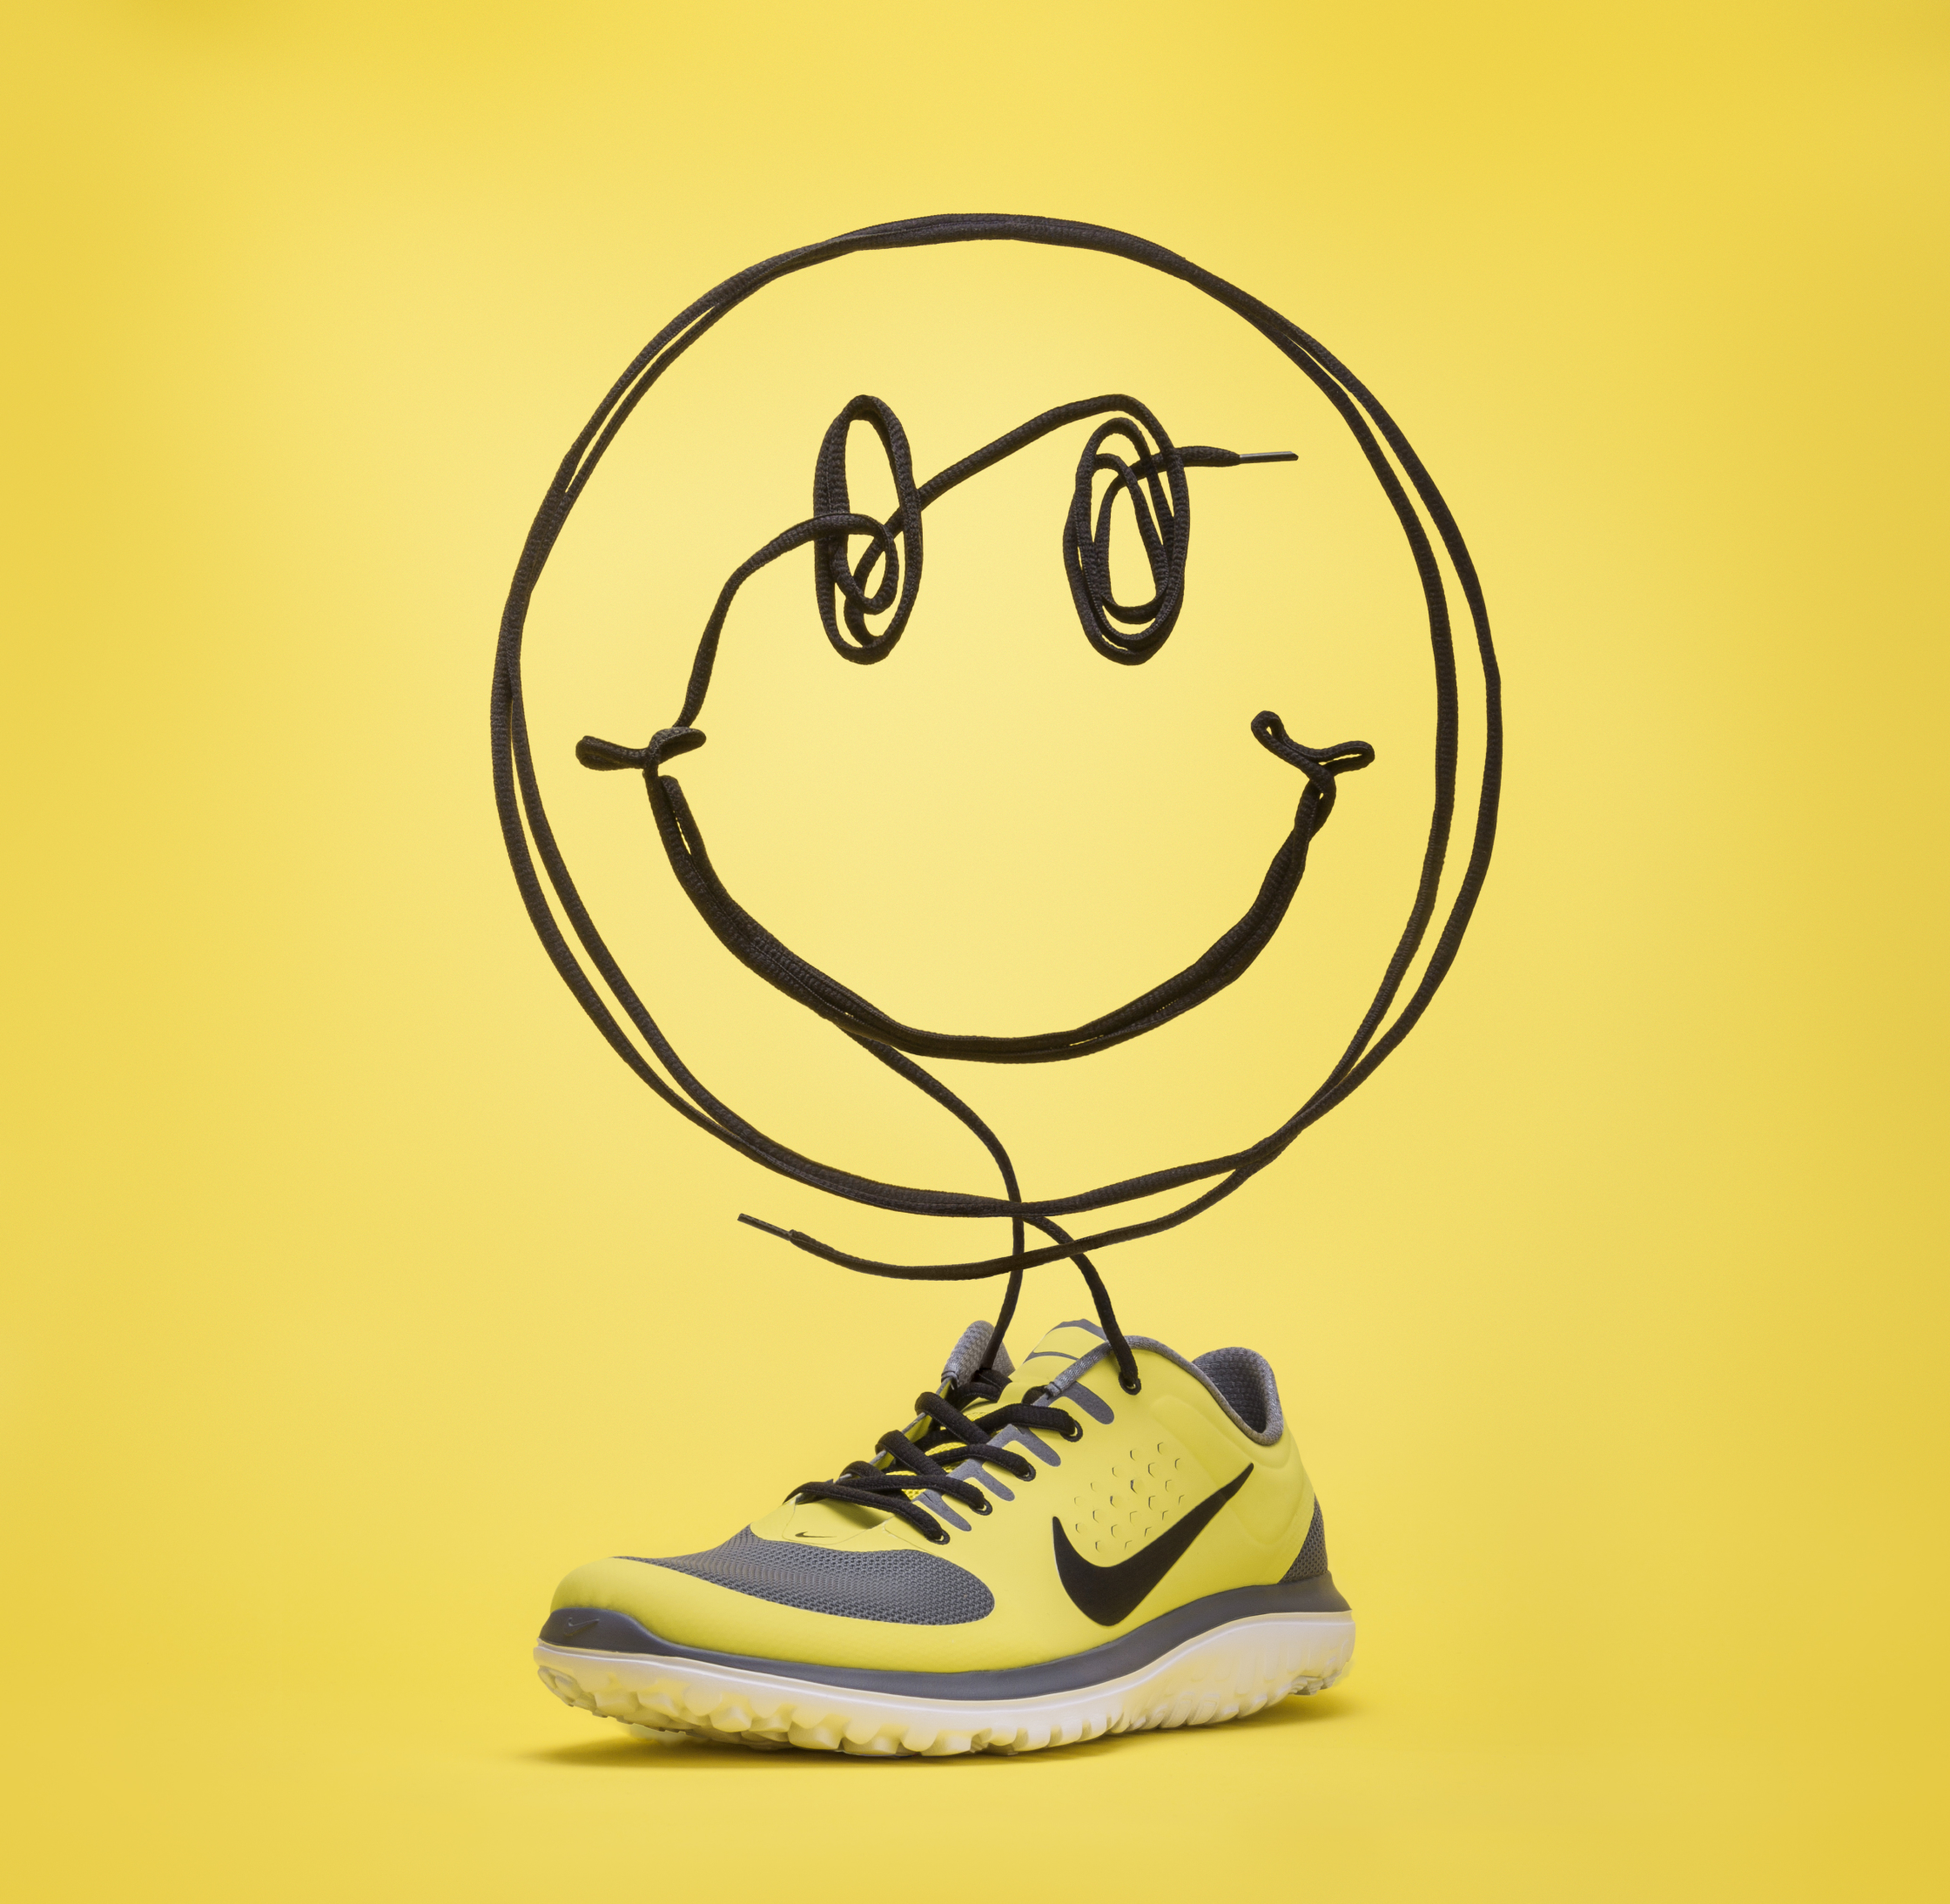 Smiley Shoes